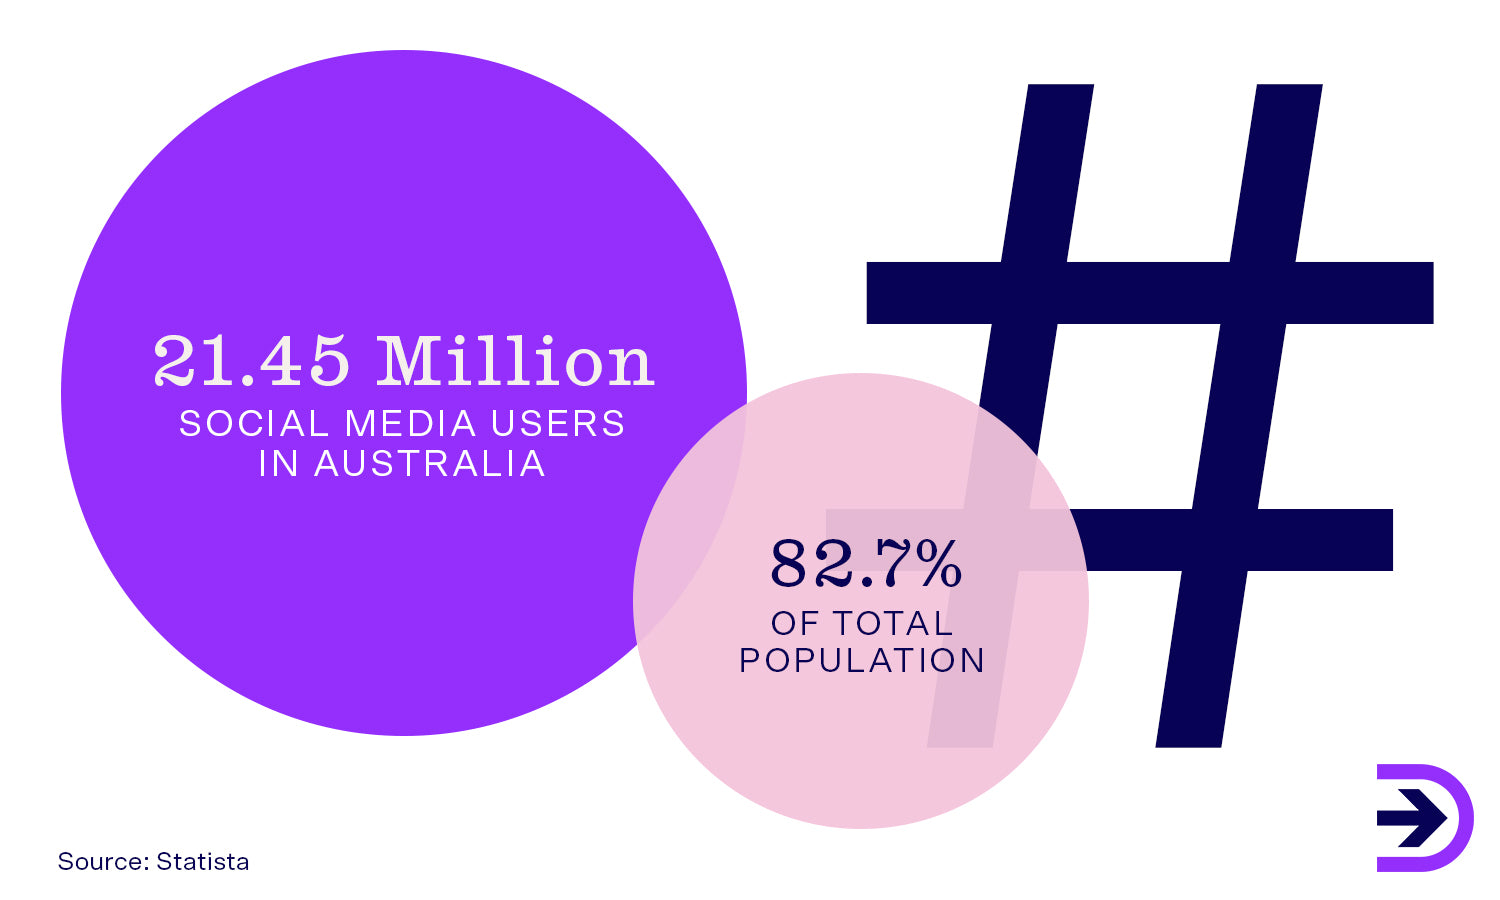 Social commerce is fuelled by approximately 82.7% of Australia's population being social media users.